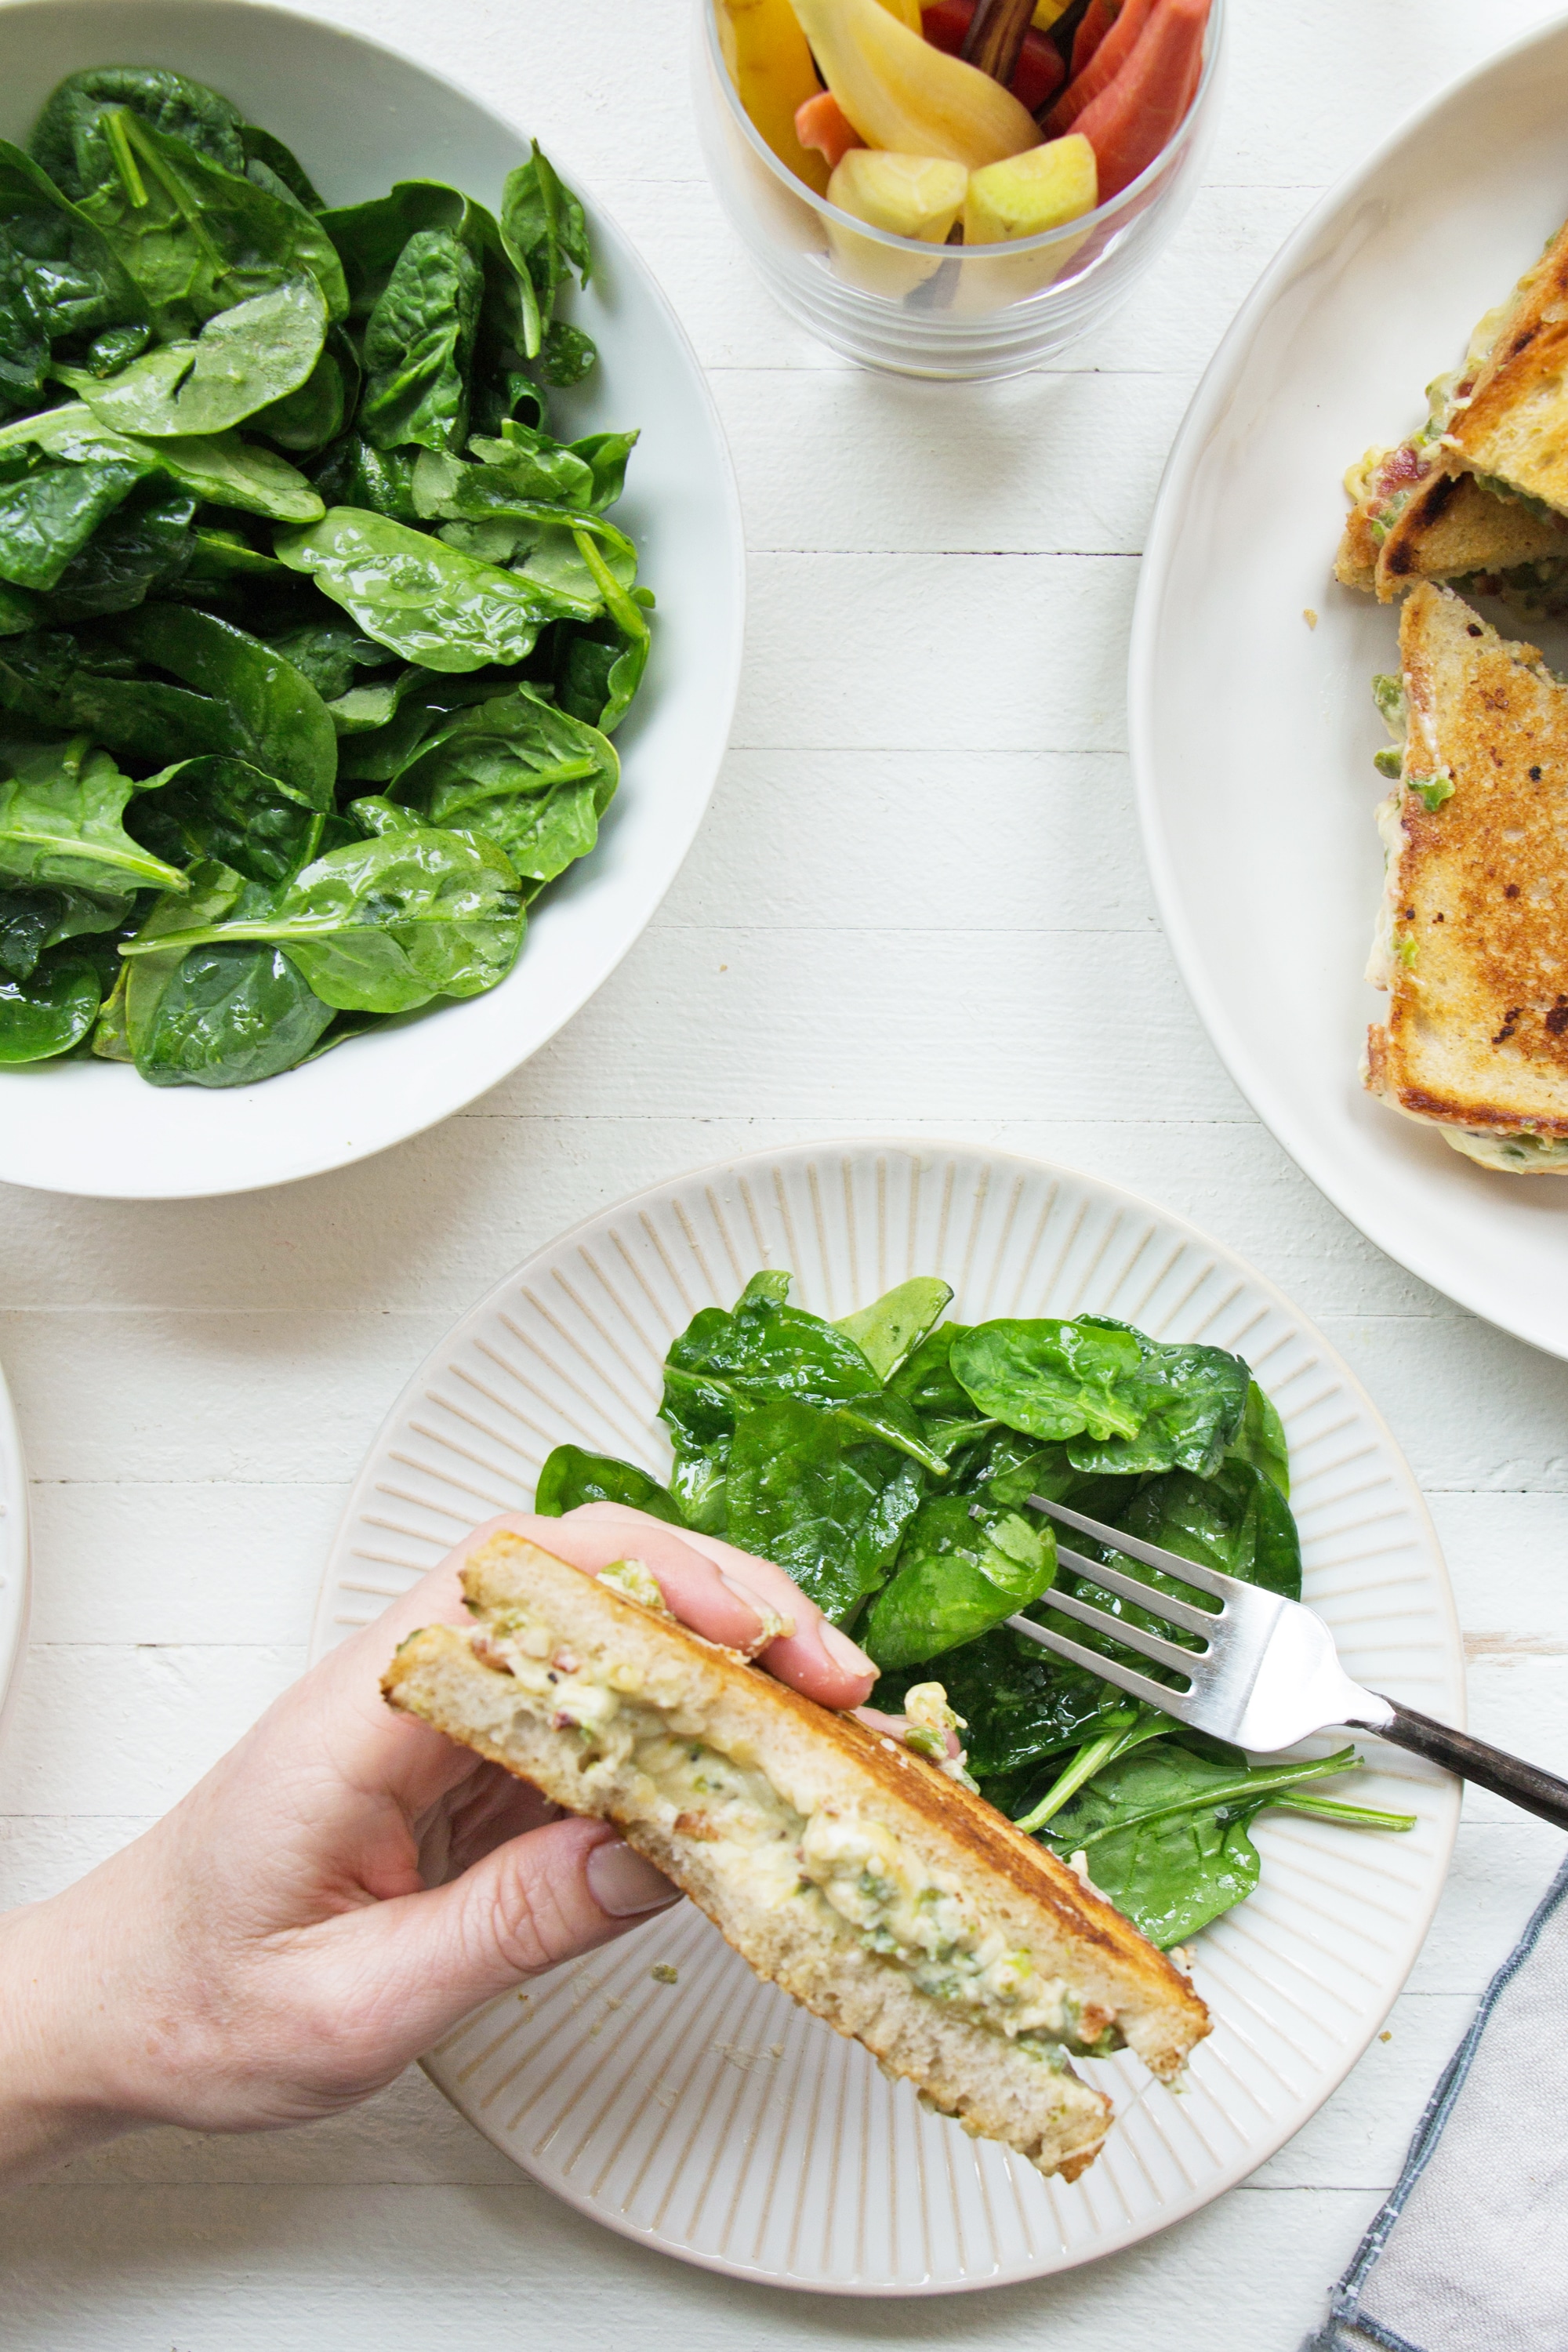 Woman holding a Jalapeno Popper Grilled Cheese sandwich over a plate of salad.